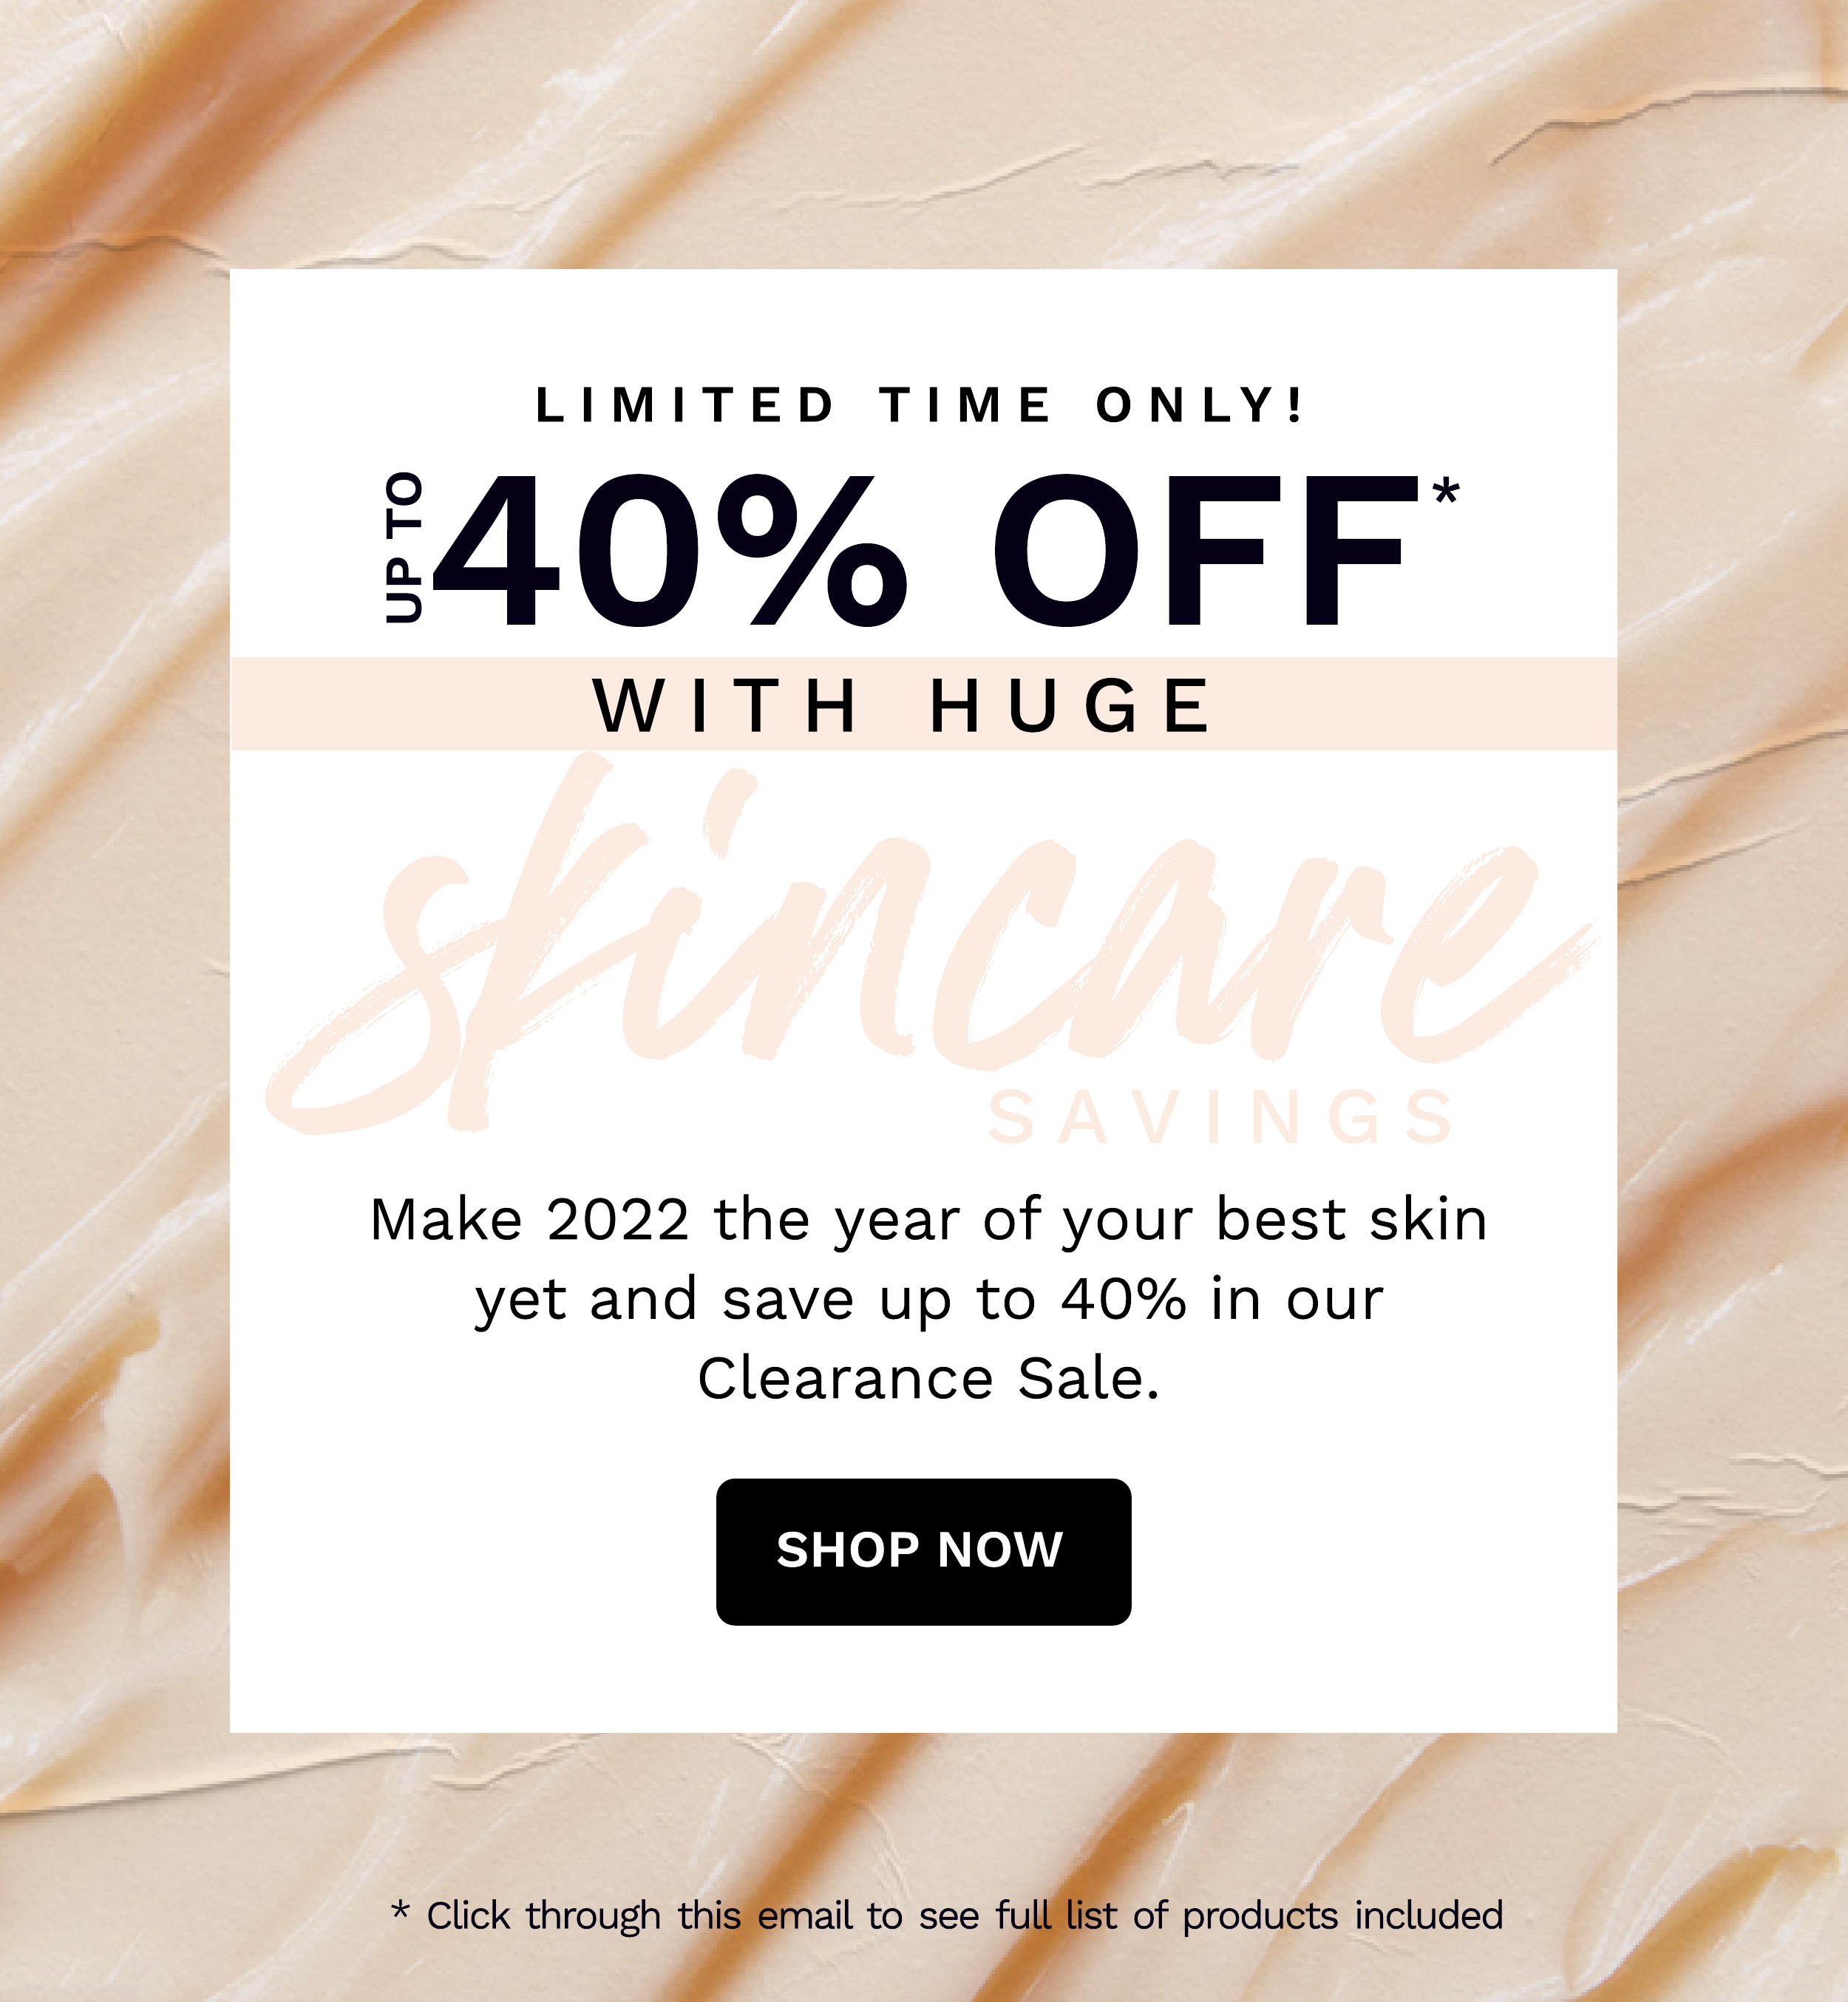  - LIMITED TIME ONLY! 40% OFF Pd WITH HUGE Make 2022 the year of your best skin yet and save up to 40% in our Clearance Sale. SHOP NOW ante , ff * Click through thi ail to see f of products included V he 